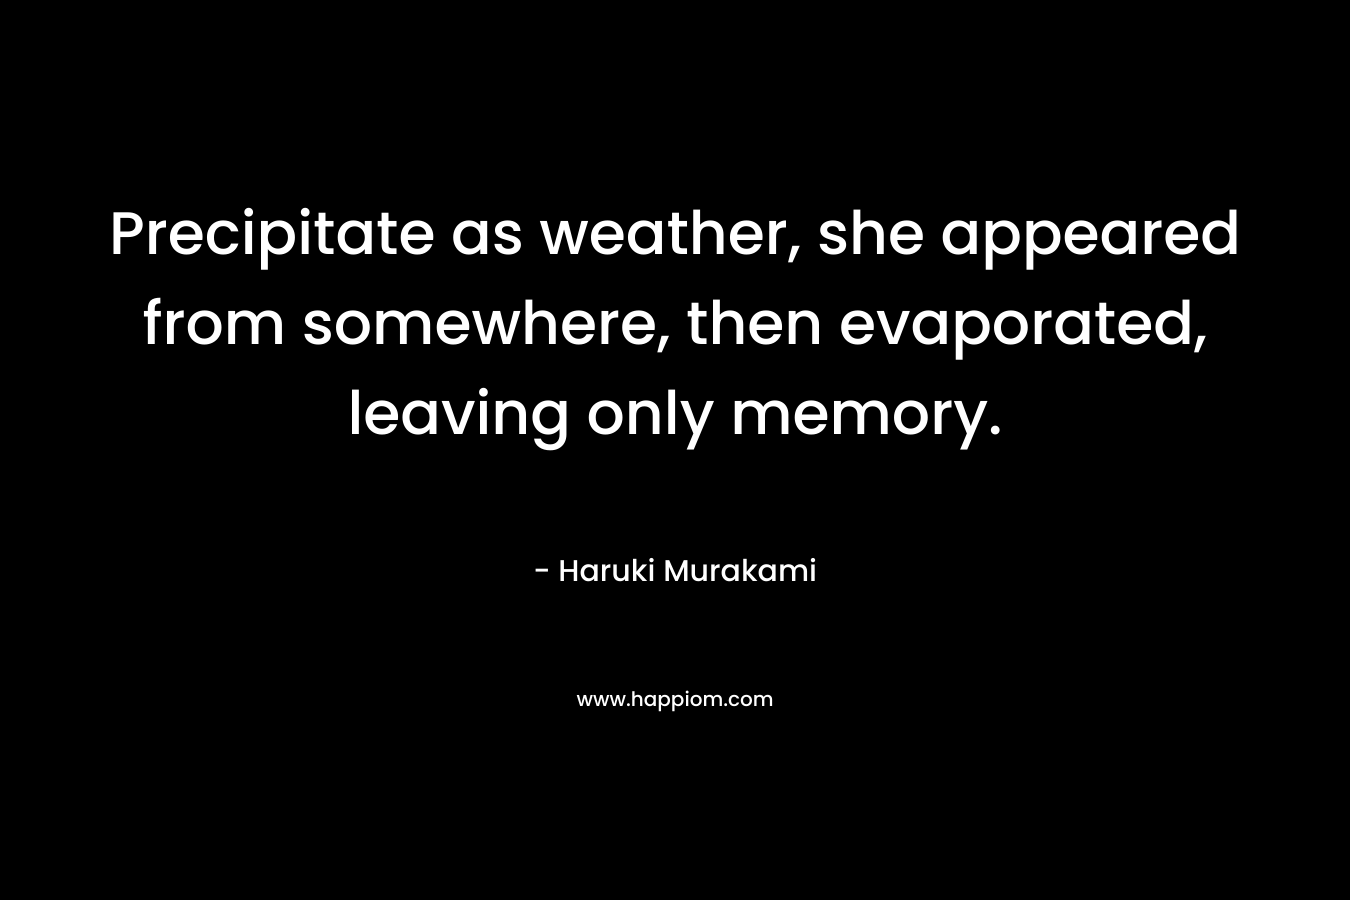 Precipitate as weather, she appeared from somewhere, then evaporated, leaving only memory. – Haruki Murakami